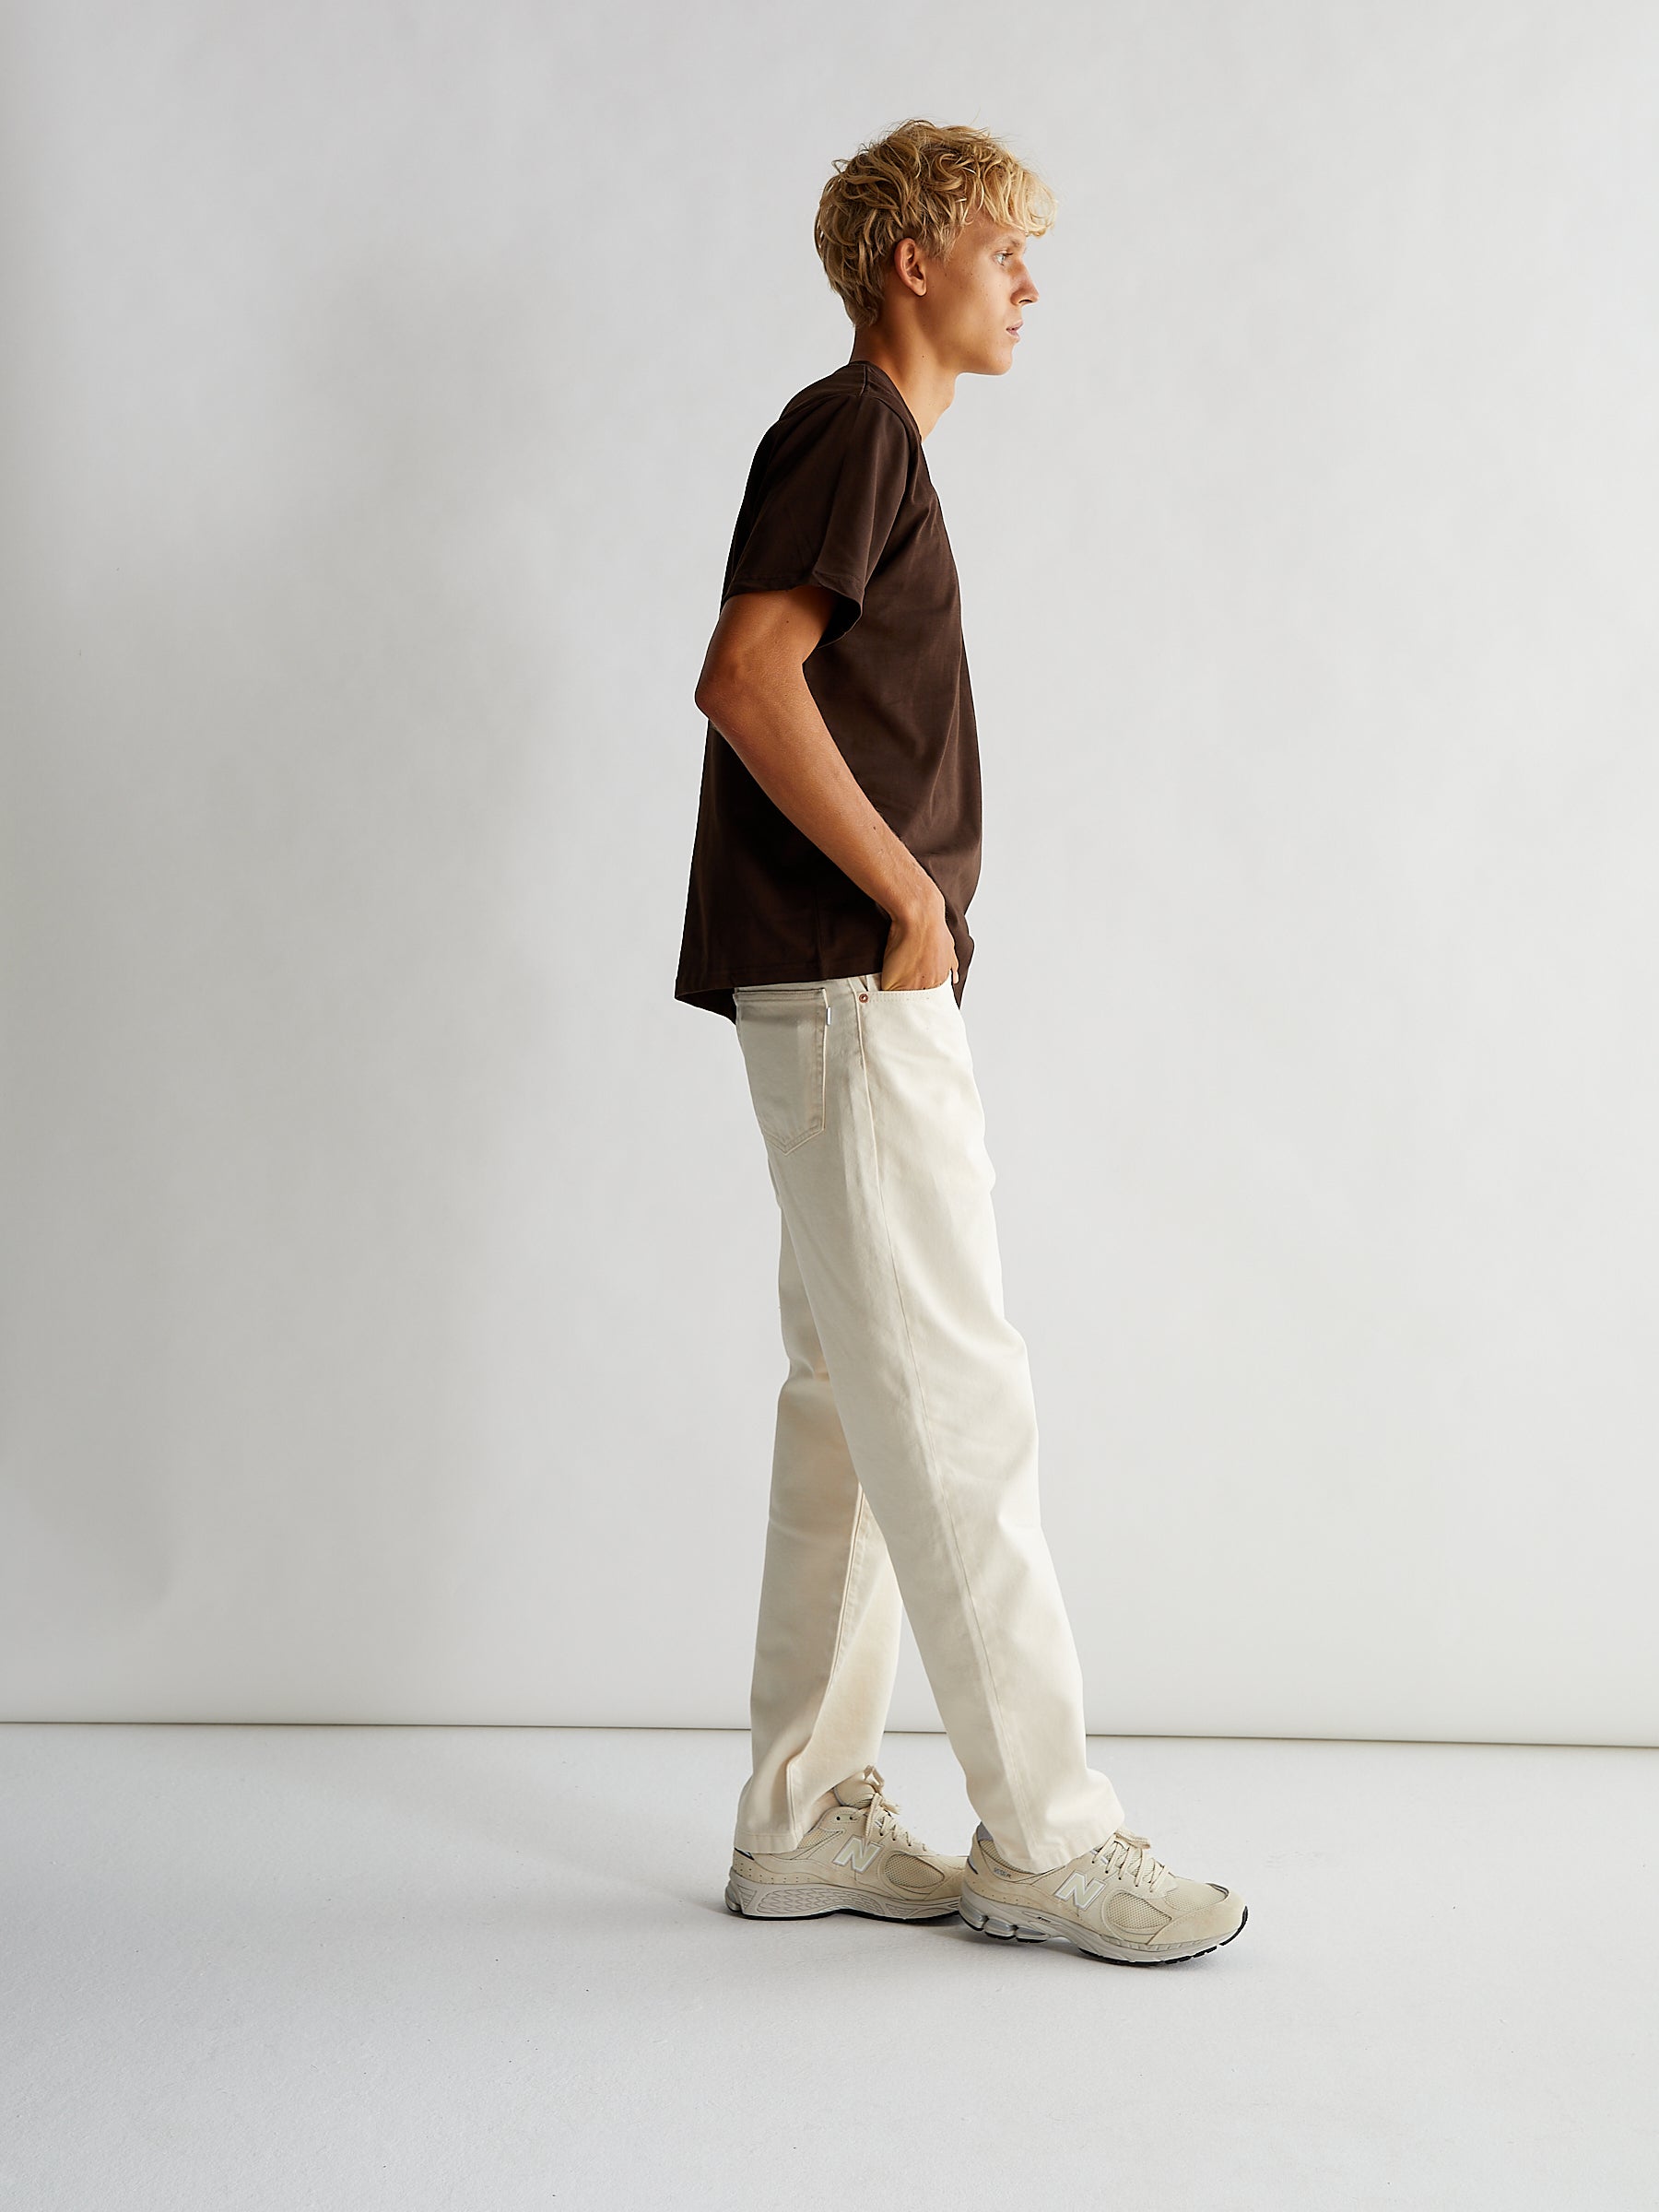 Woodbird Leroy Twill Pants Jeans Off White